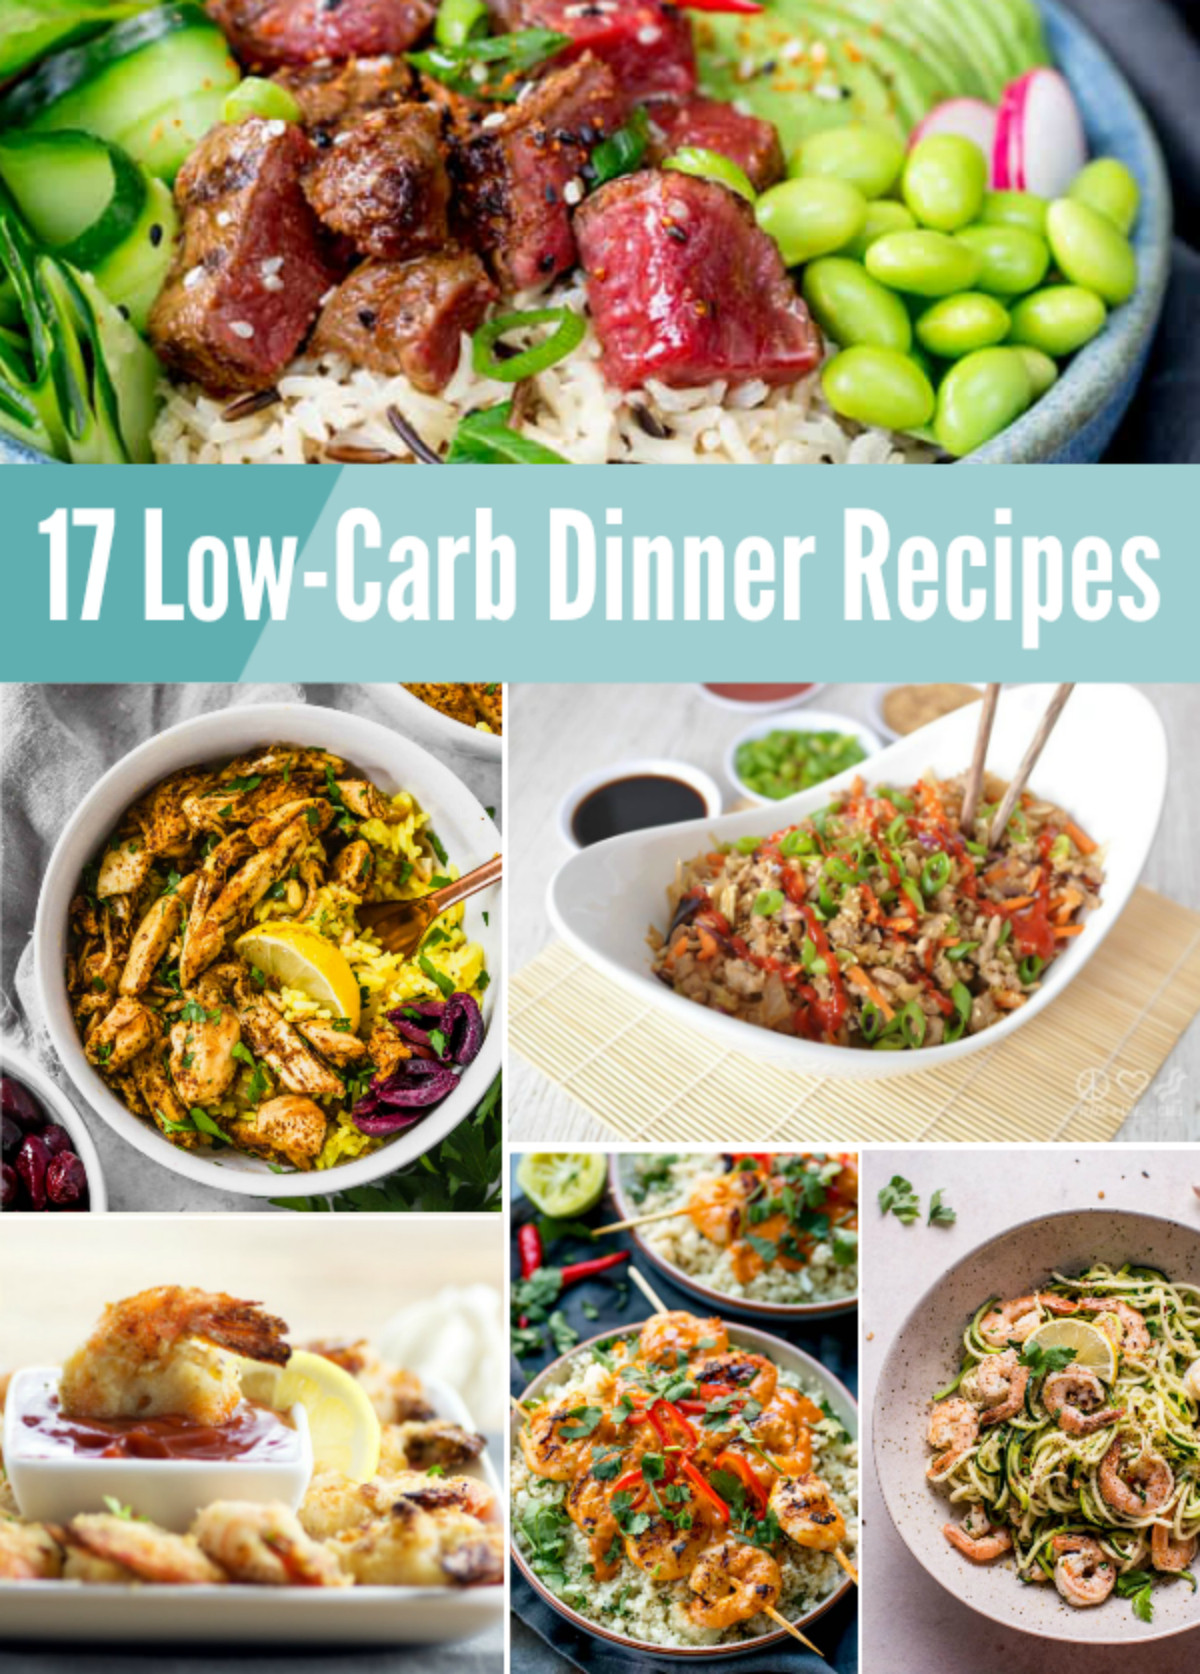 Best Low Carb Dinner Recipes
 17 Low Carb Dinner Recipes from MamaMommyMom